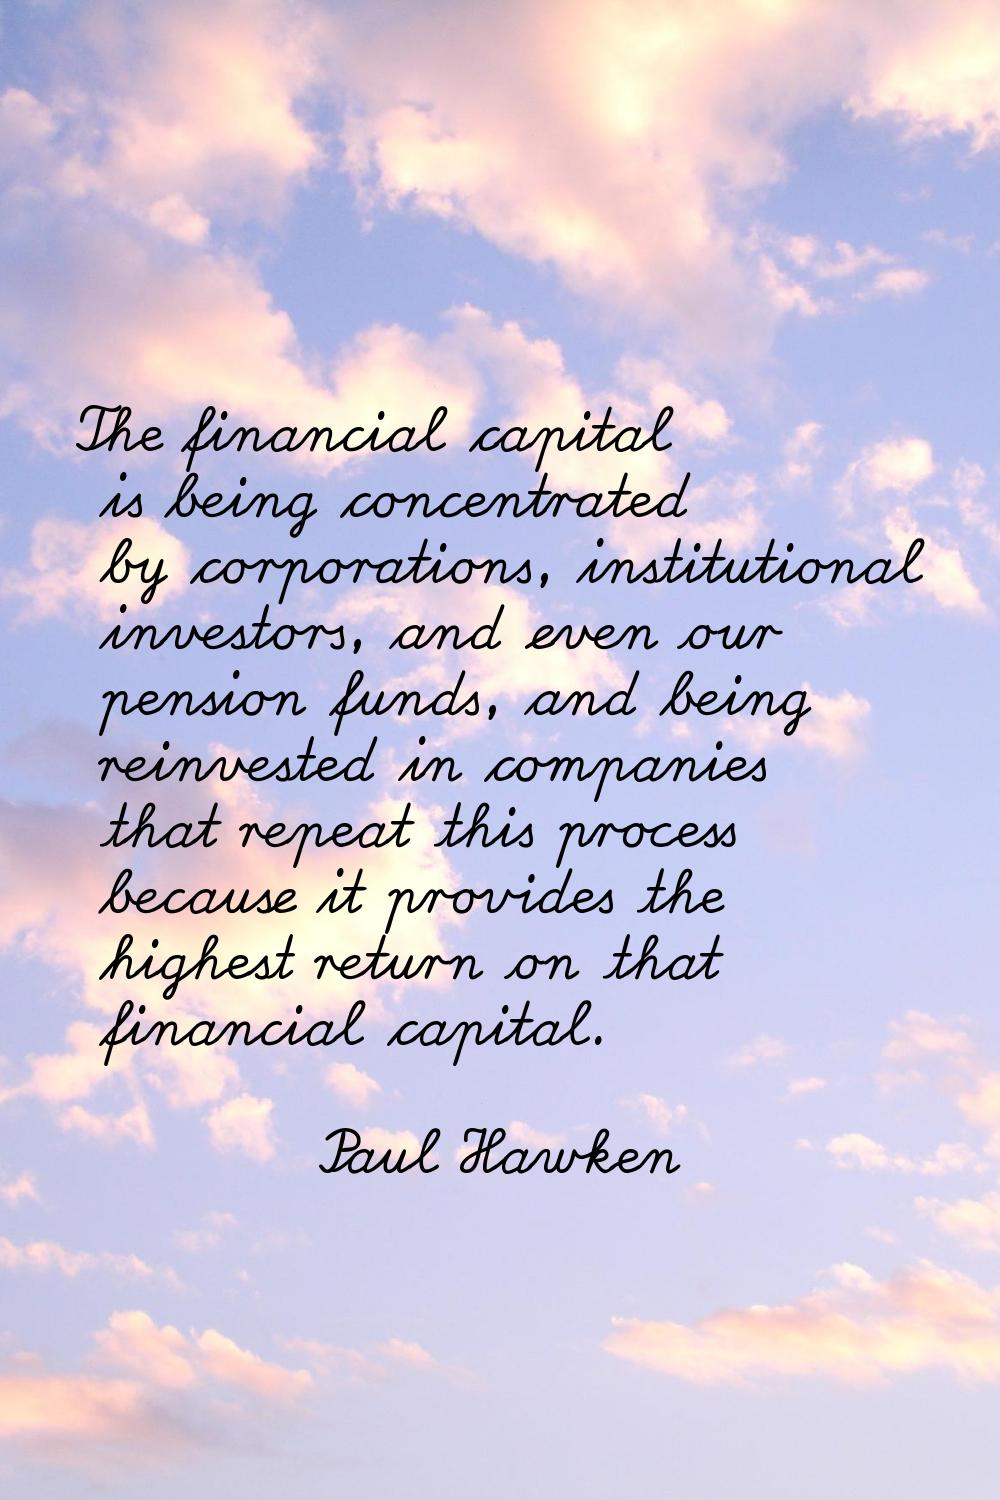 The financial capital is being concentrated by corporations, institutional investors, and even our 